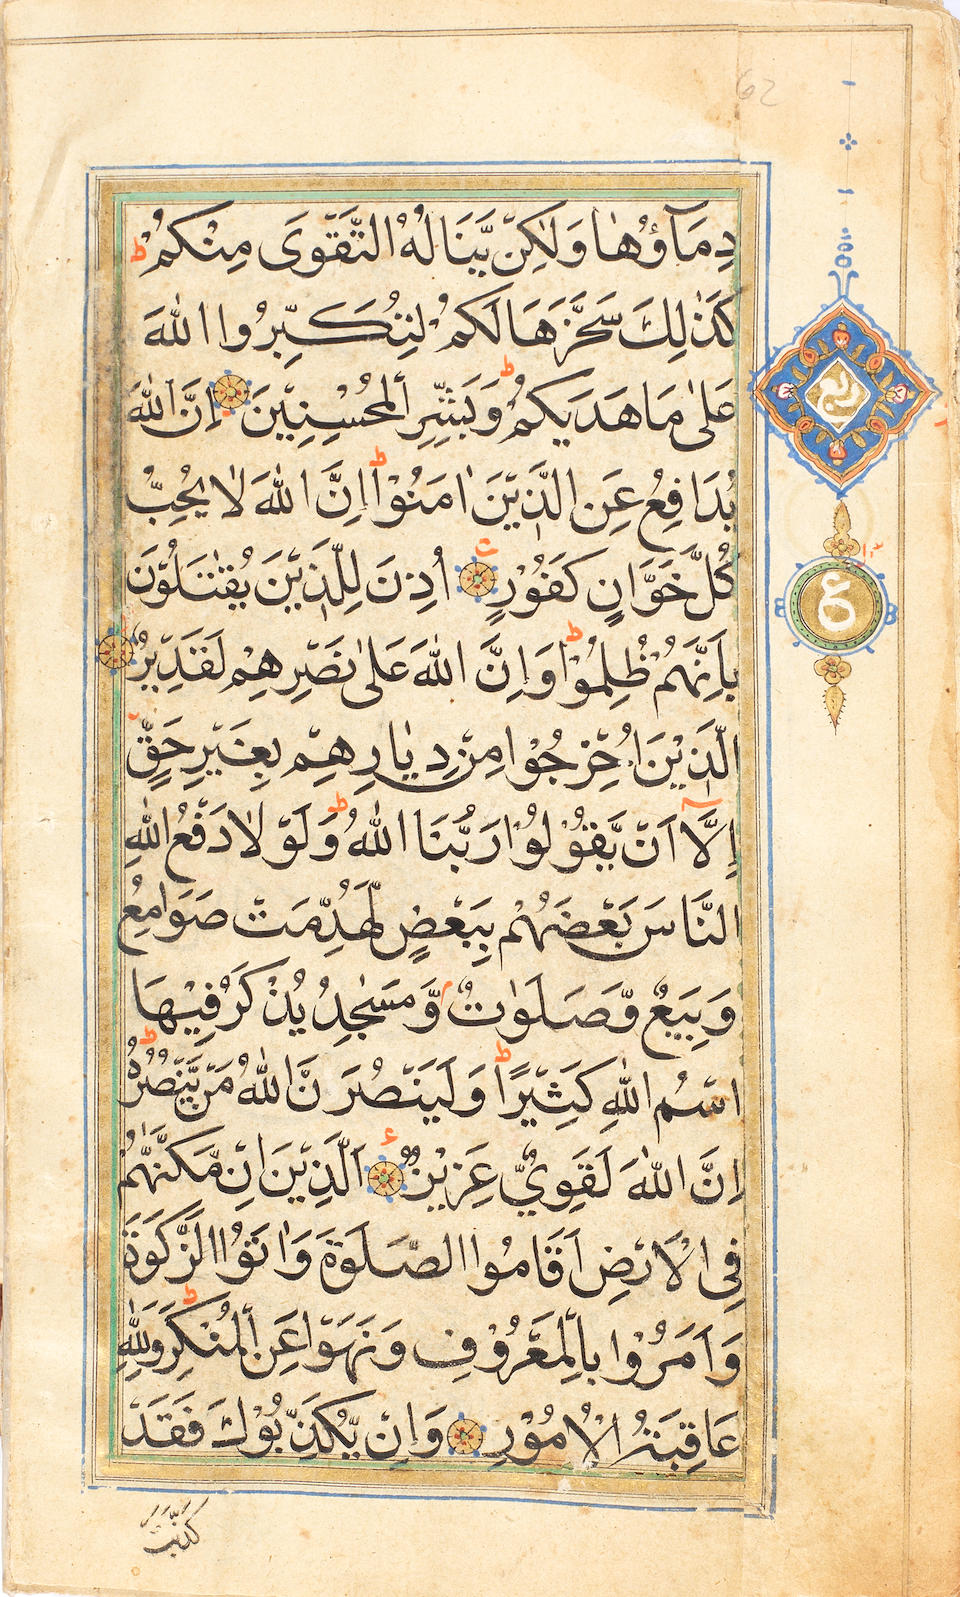 An illuminated Qur'an North India, late 17th/early 18th Century